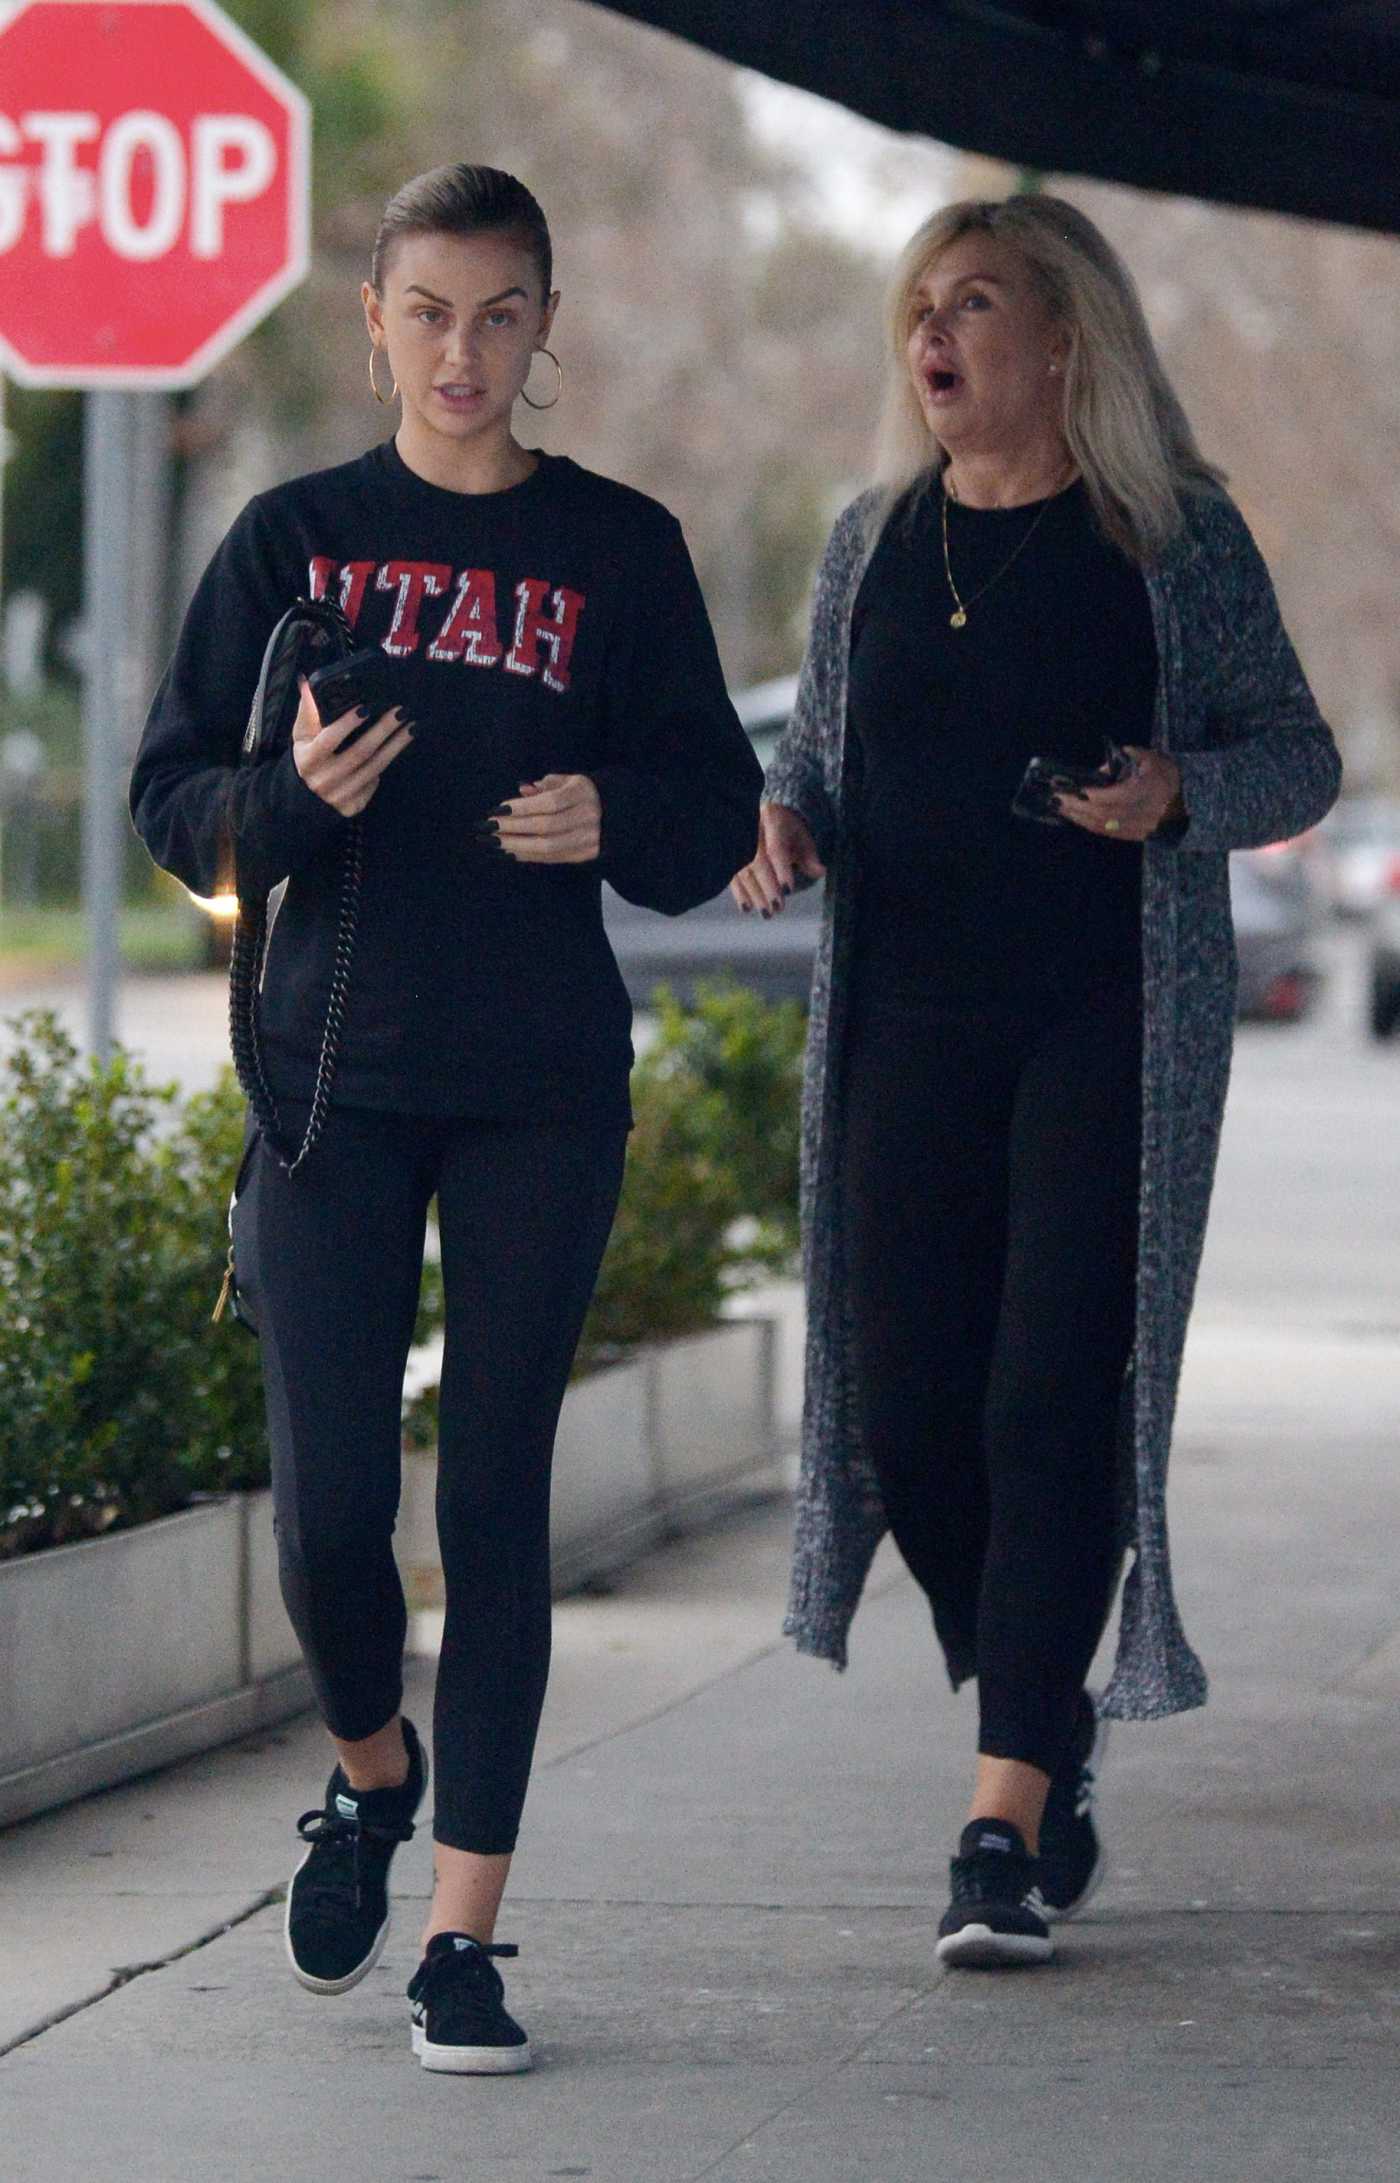 Lala Kent in a Black Sneakers Spends Time with Her Mother in Los Angeles 01/03/2023